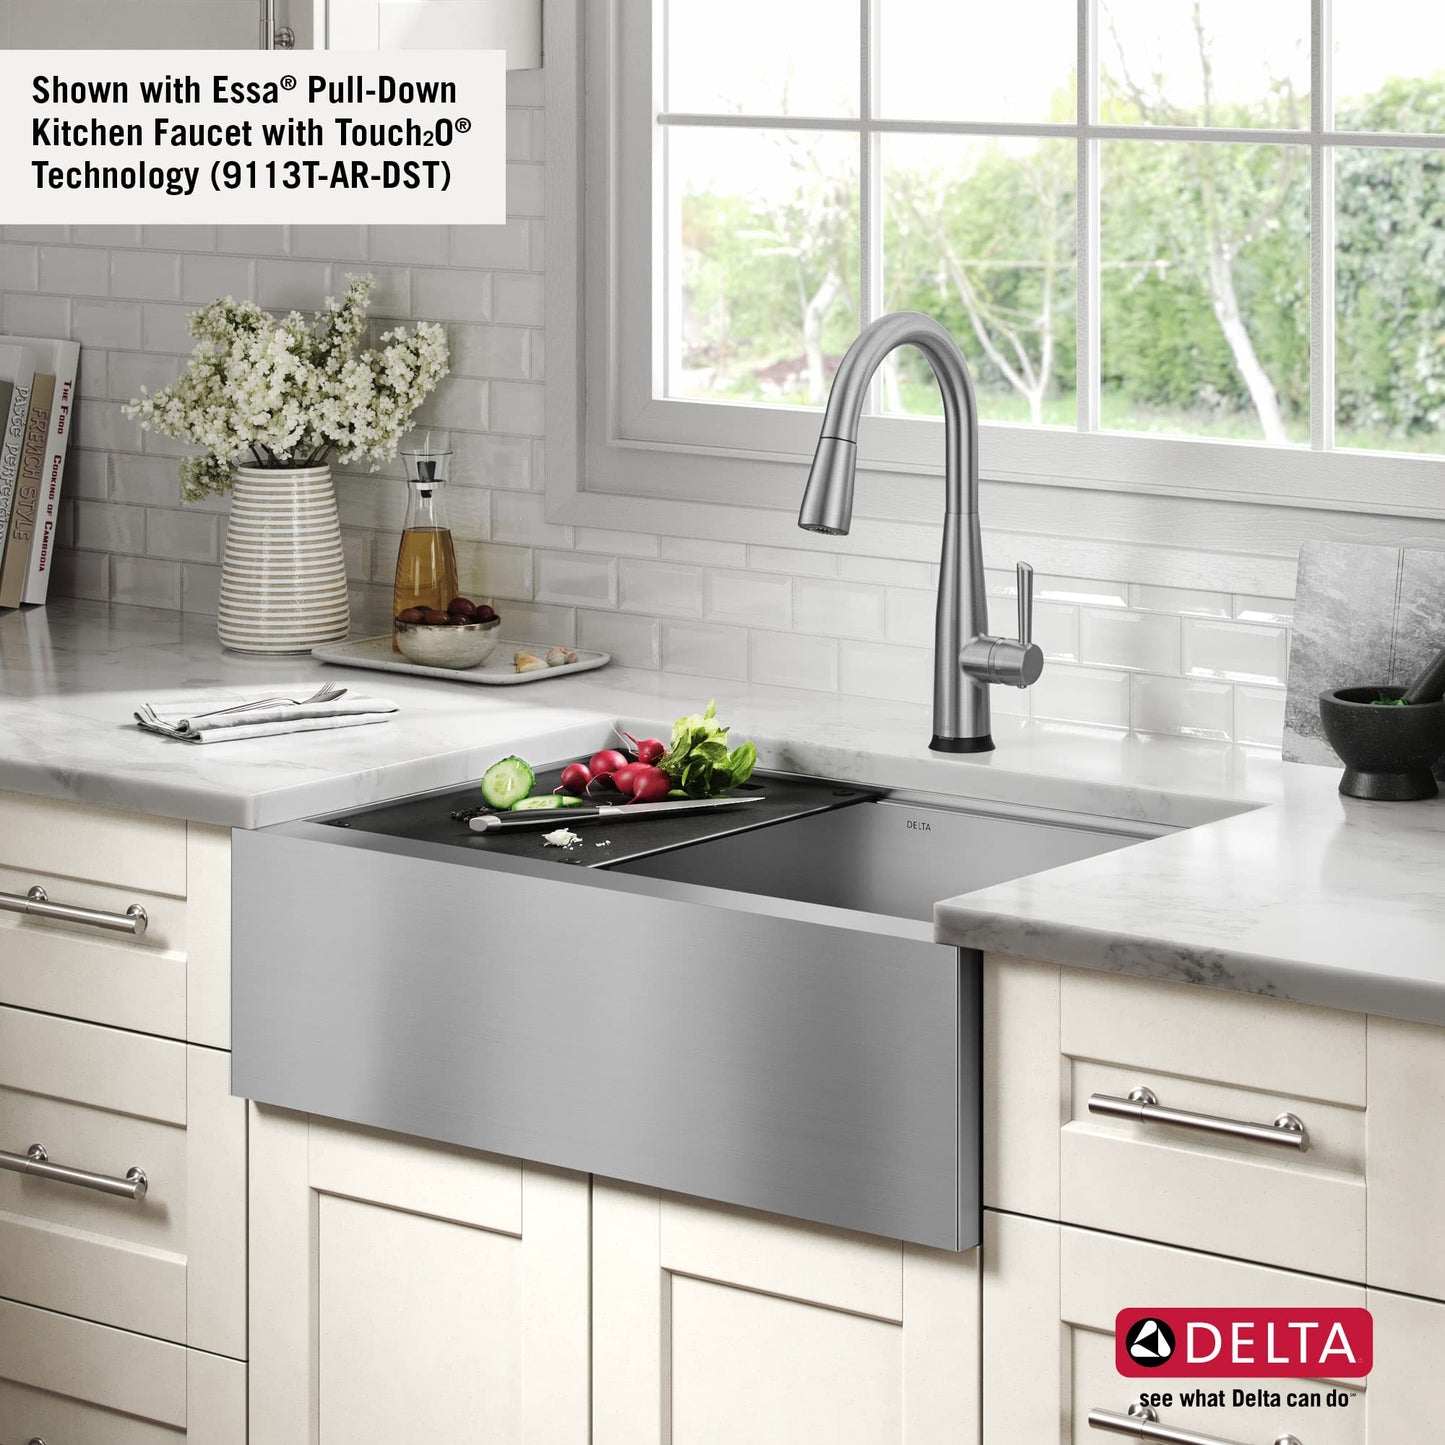 DELTA FAUCET Rivet 30-inch Workstation Farmhouse Apron Front Kitchen Sink Undermount 16 Gauge Stainless Steel Single Bowl with WorkFlow Ledge and Kit of 5 Accessories, 95C9031-30S-SS - Like New